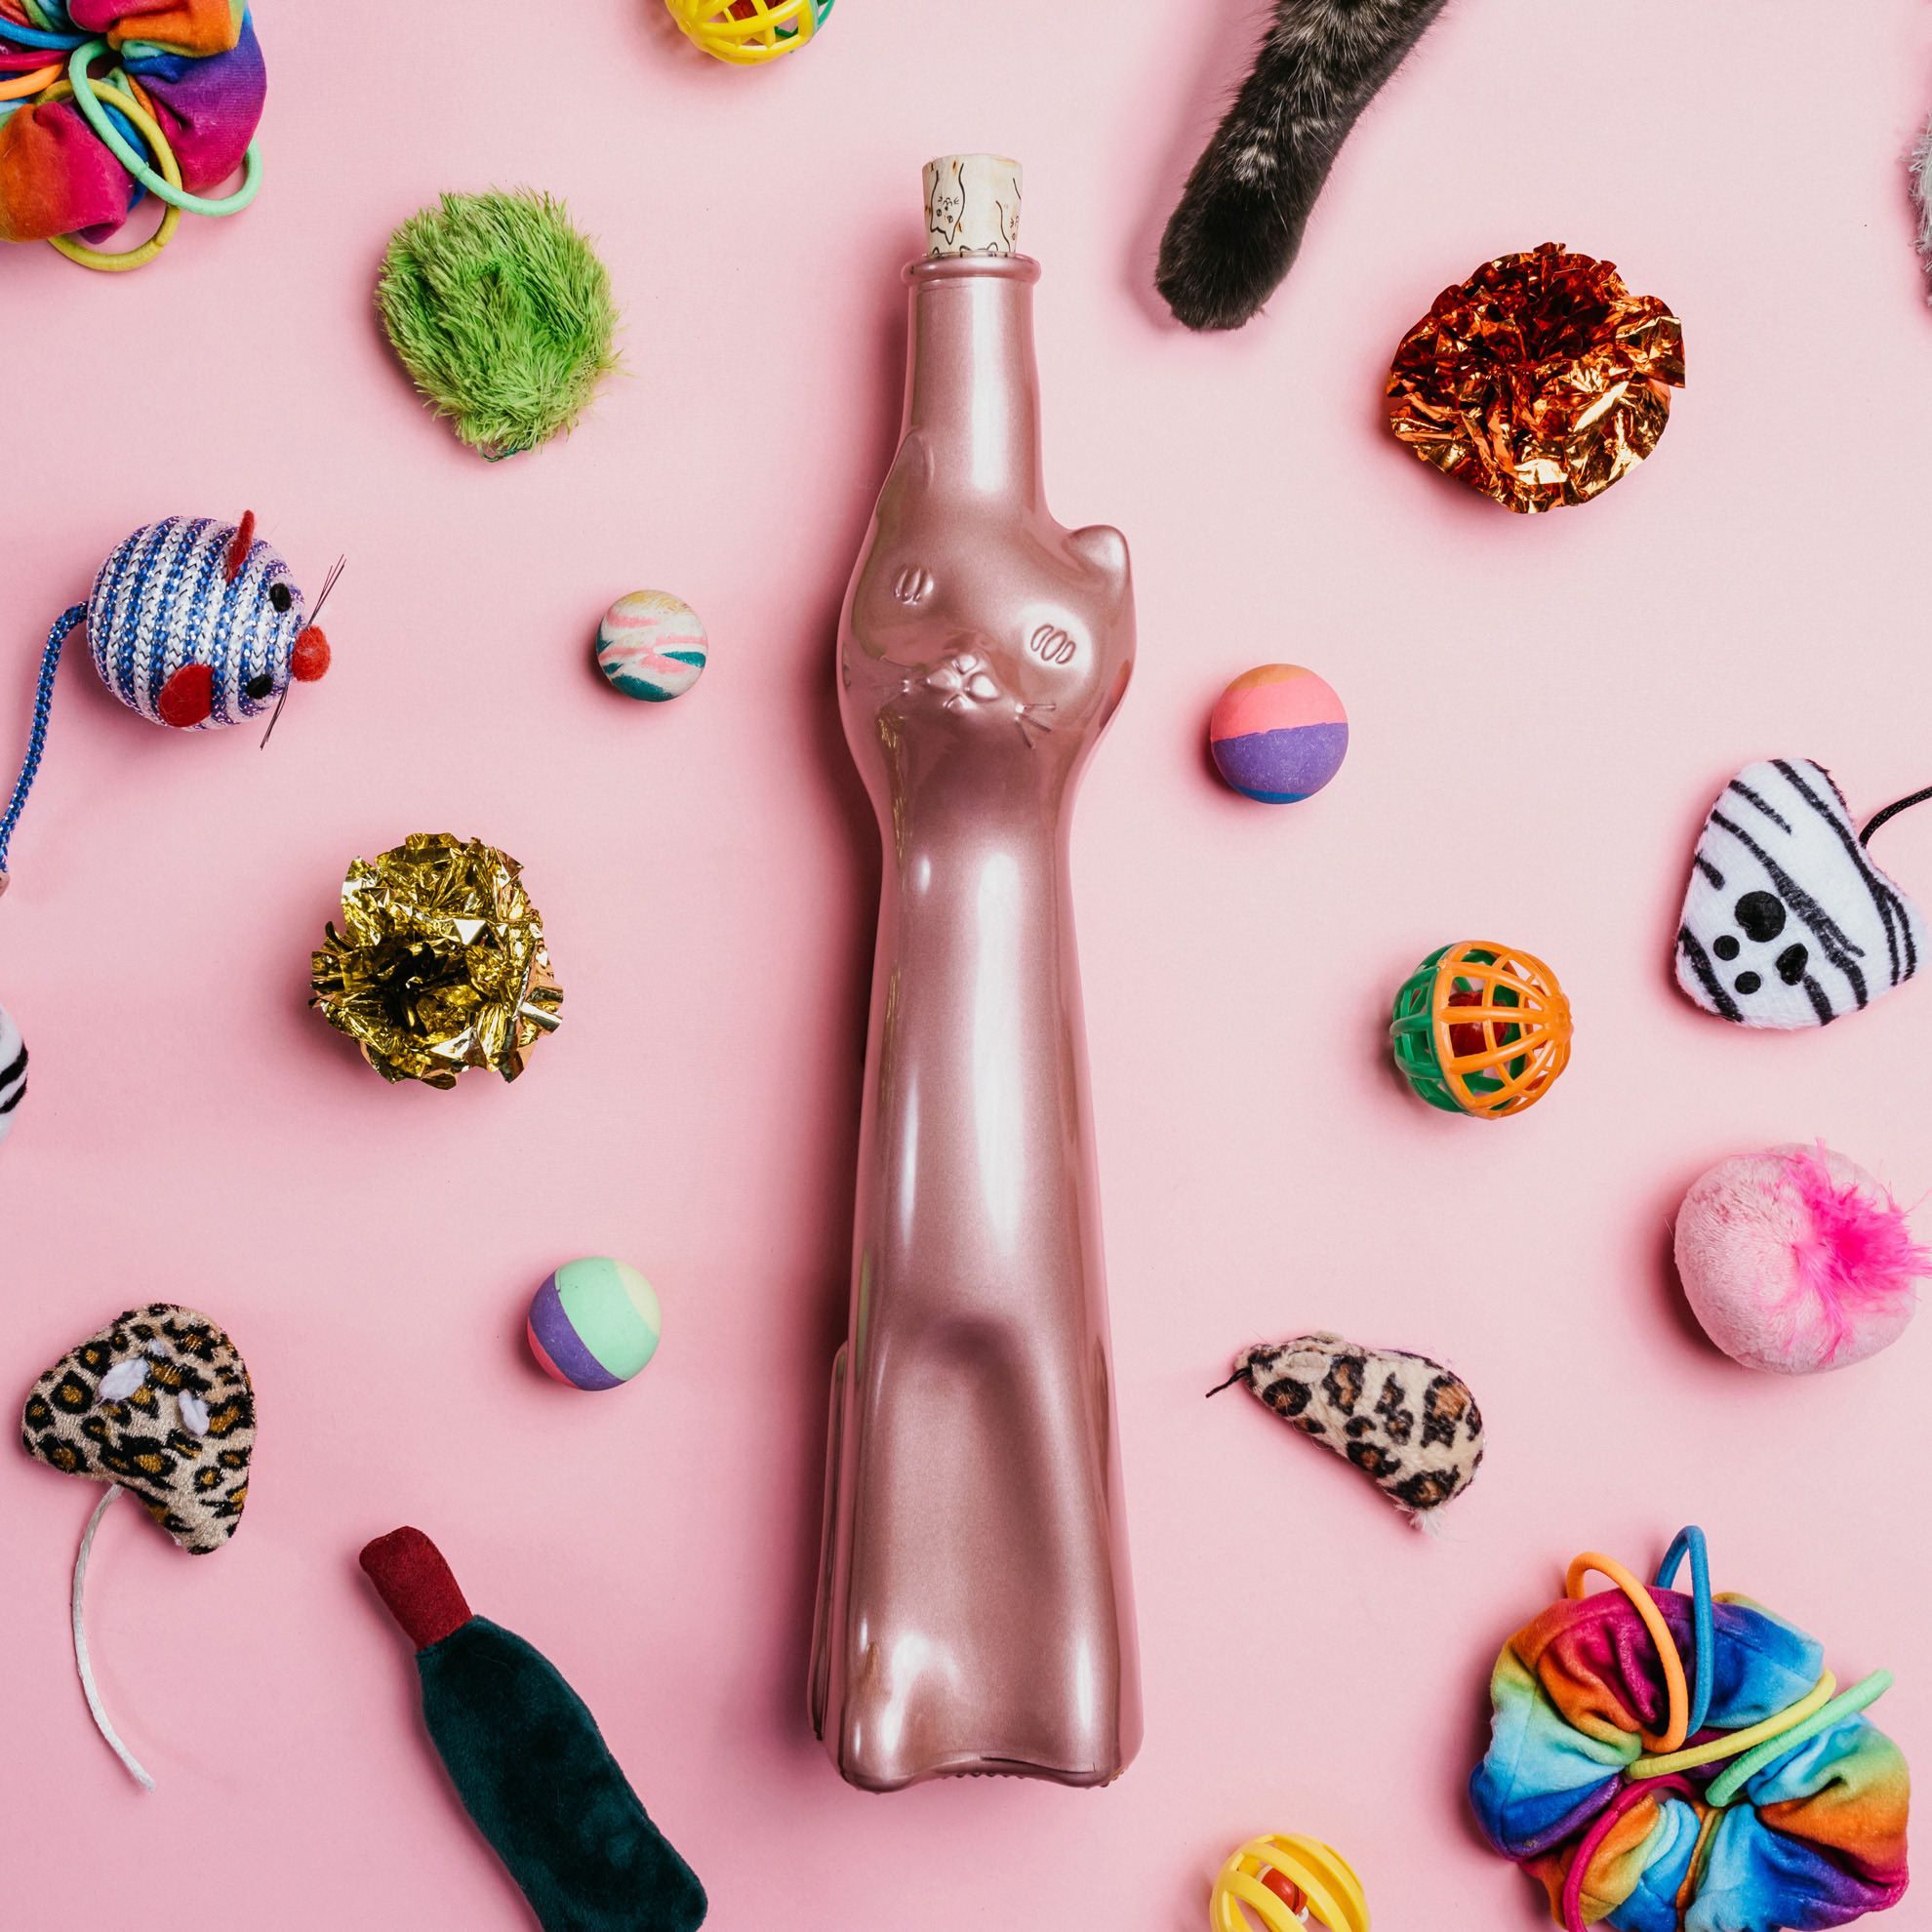 wine bottle in shape of cat laying on pink background surrounded by cat toys with a cat paw reaching towards it